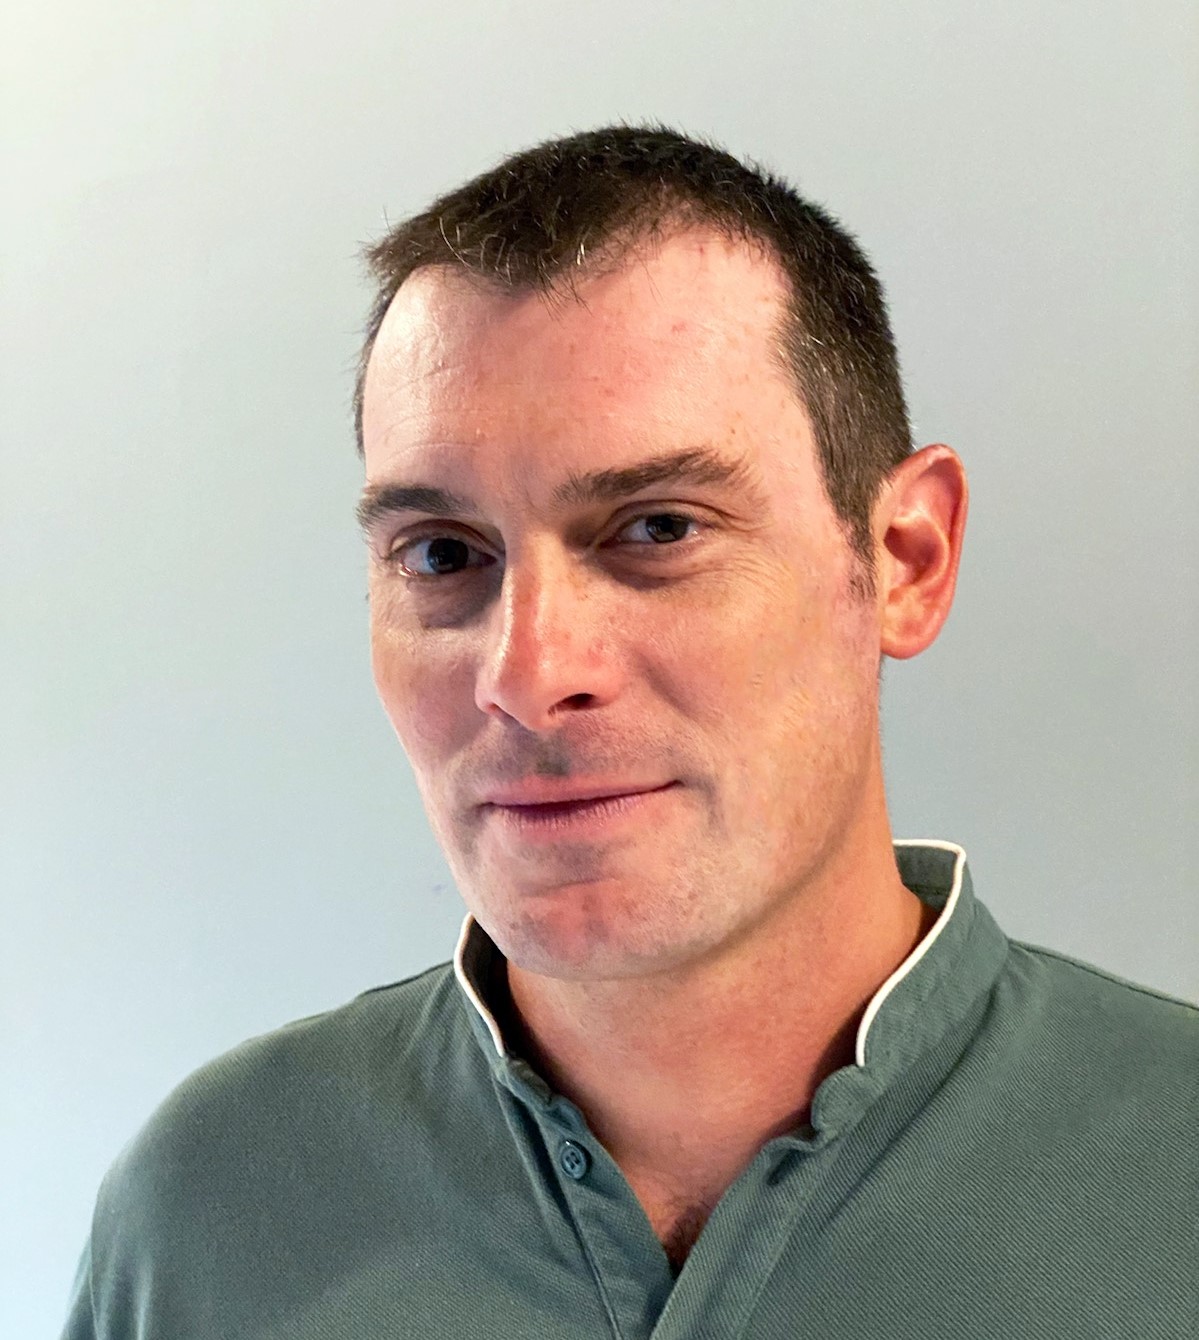 Marc Schmitz works with Aedvices' team as a design office.